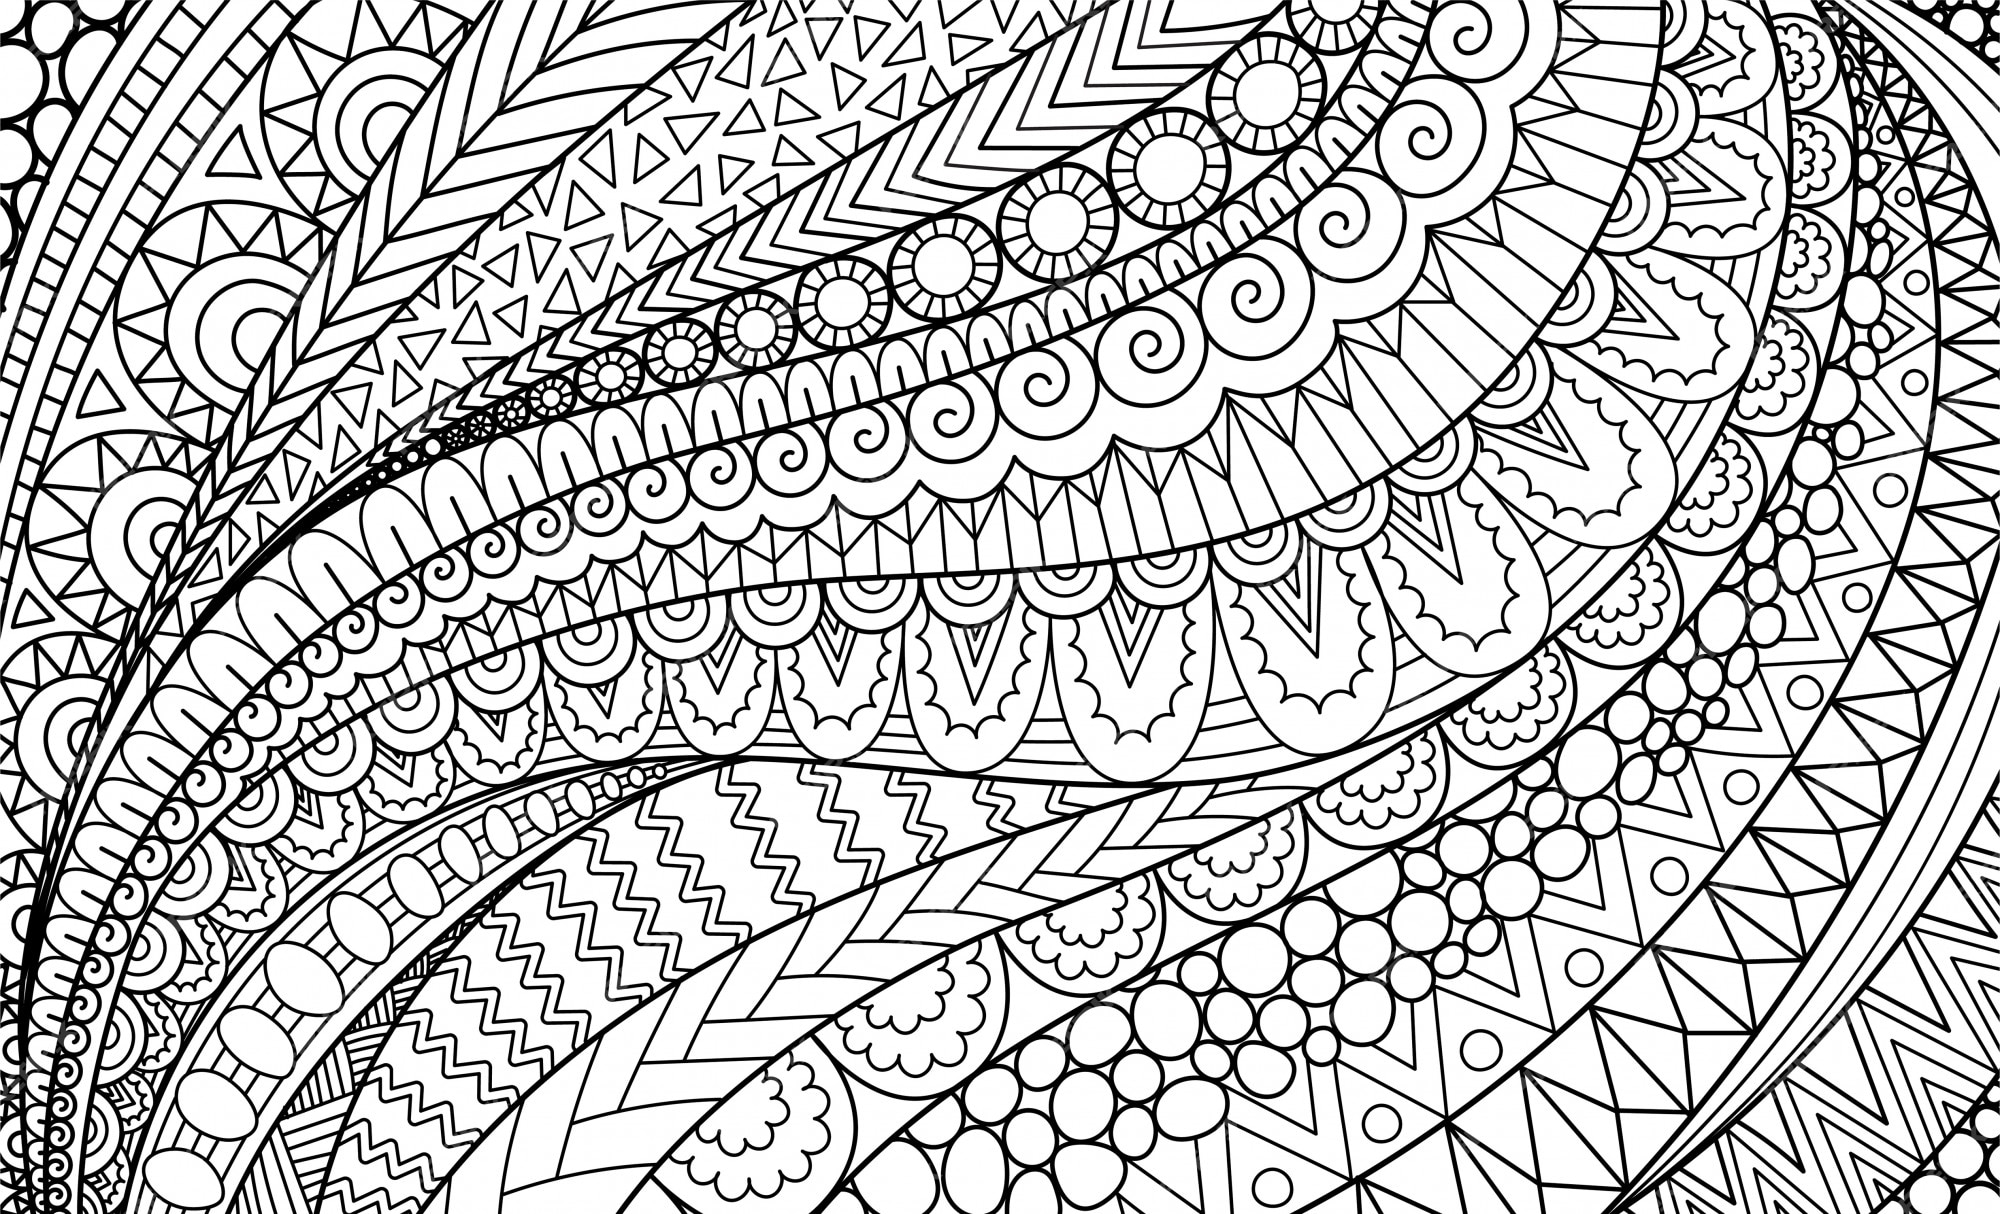 Coloring Pages Images   Free Vectors, Stock Photos & PSD